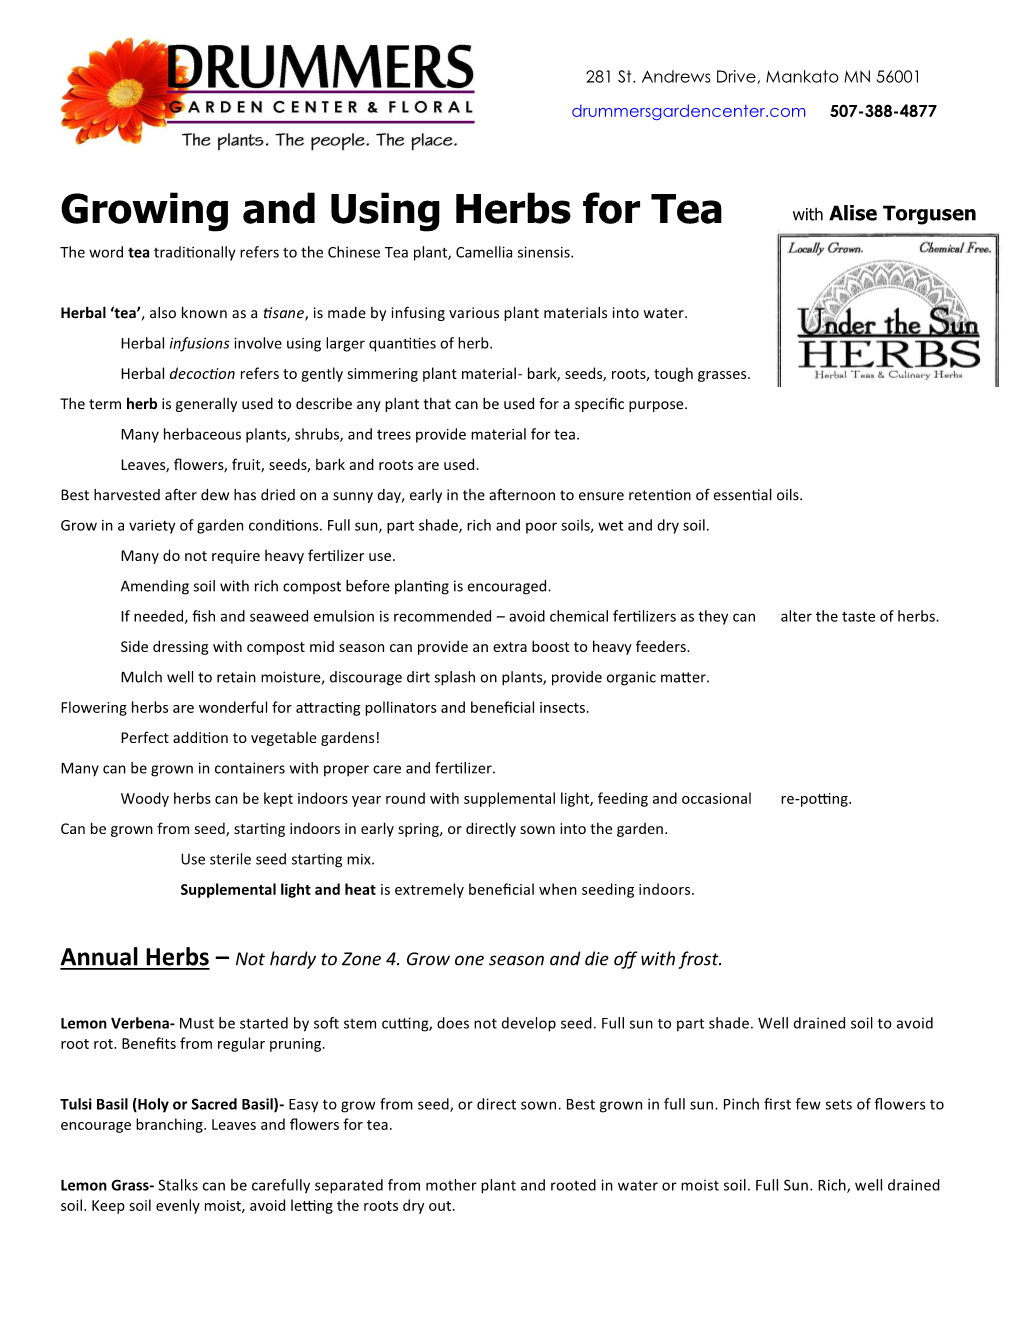 Herbs for Tea with Alise Torgusen the Word Tea Traditionally Refers to the Chinese Tea Plant, Camellia Sinensis